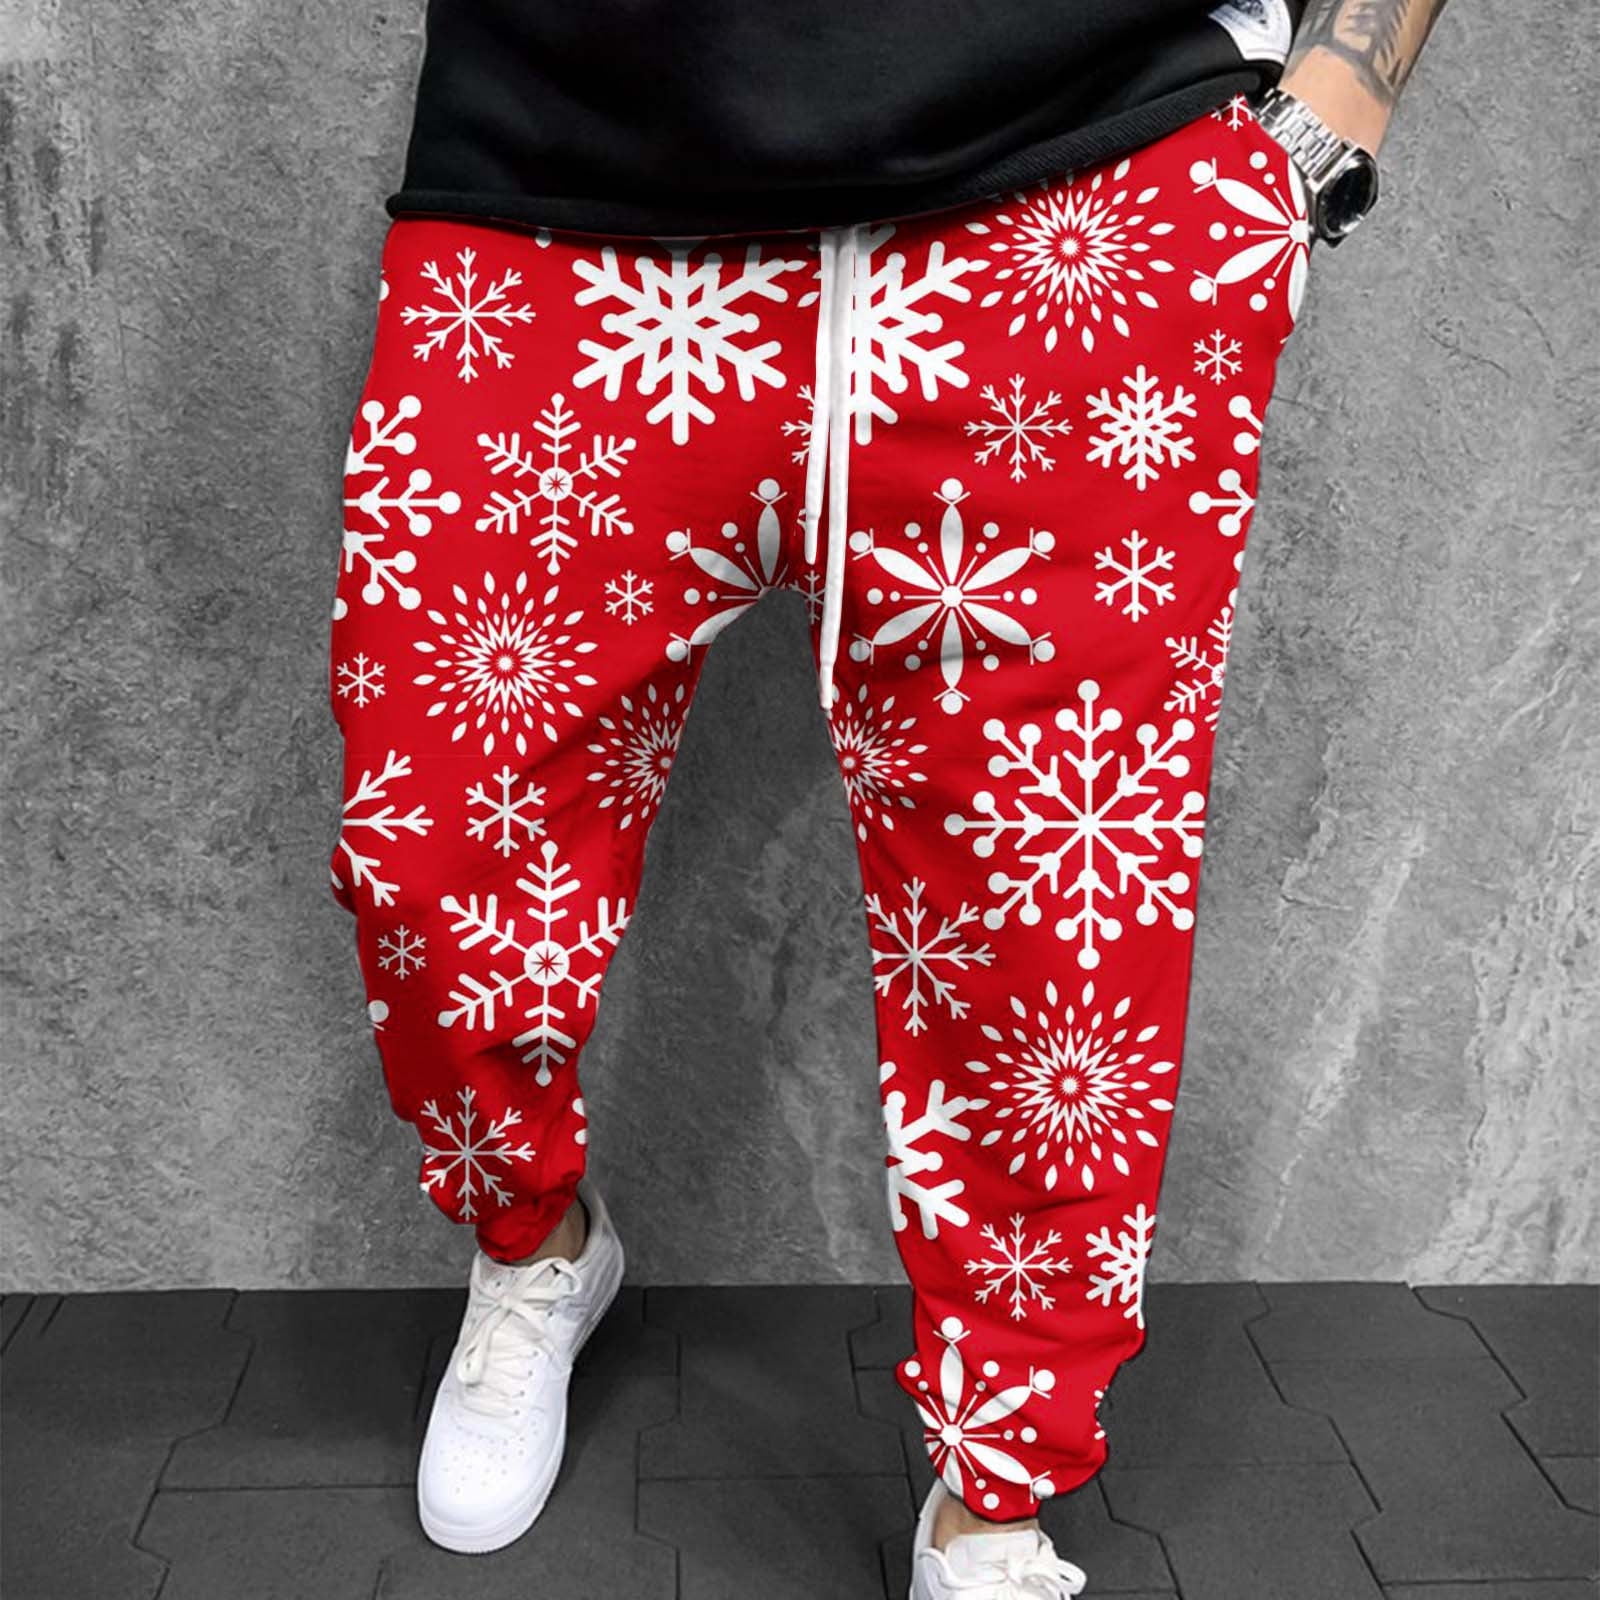 MENS ADULTS NOVELTY CHRISTMAS SUIT JACKET TROUSERS TIE FUNNY XMAS PARTY  FESTIVE  eBay